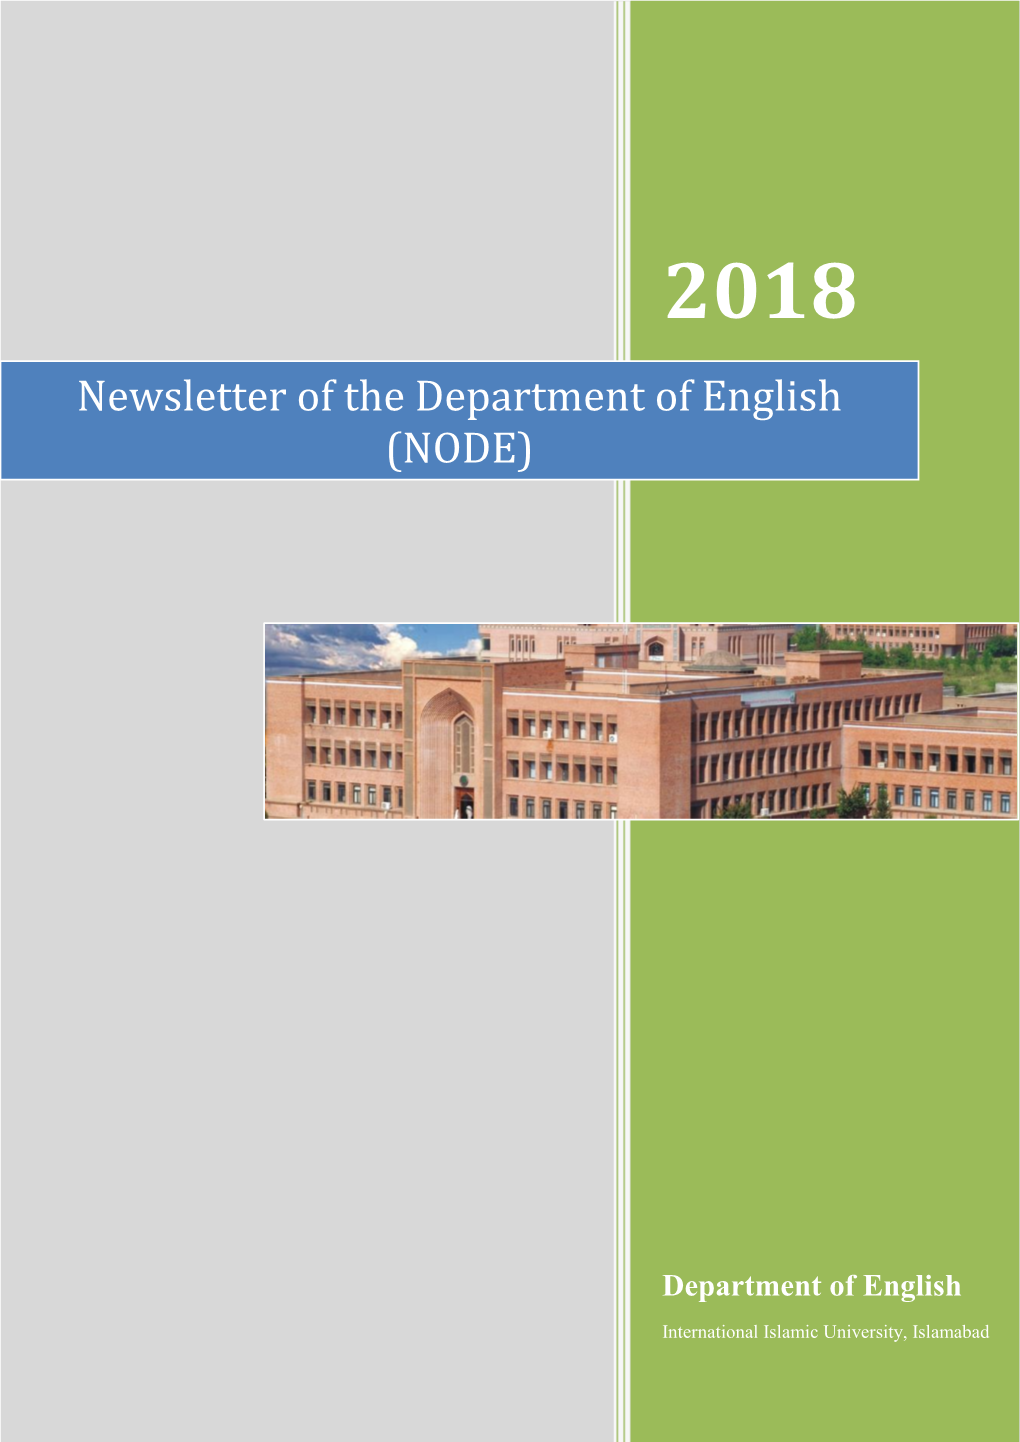 Newsletter of the Department of English (NODE)